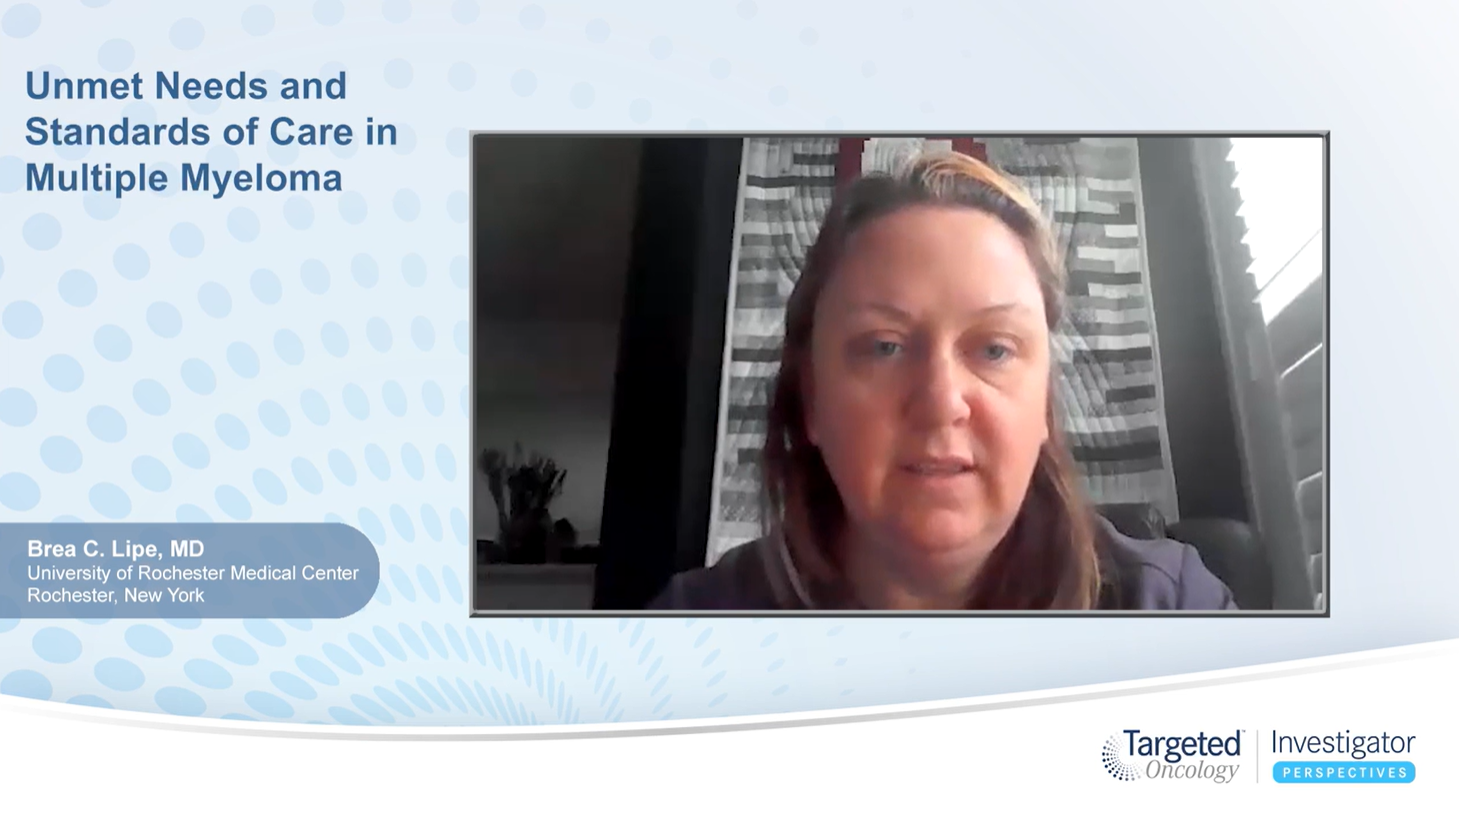 Unmet Needs and Standards of Care in Multiple Myeloma